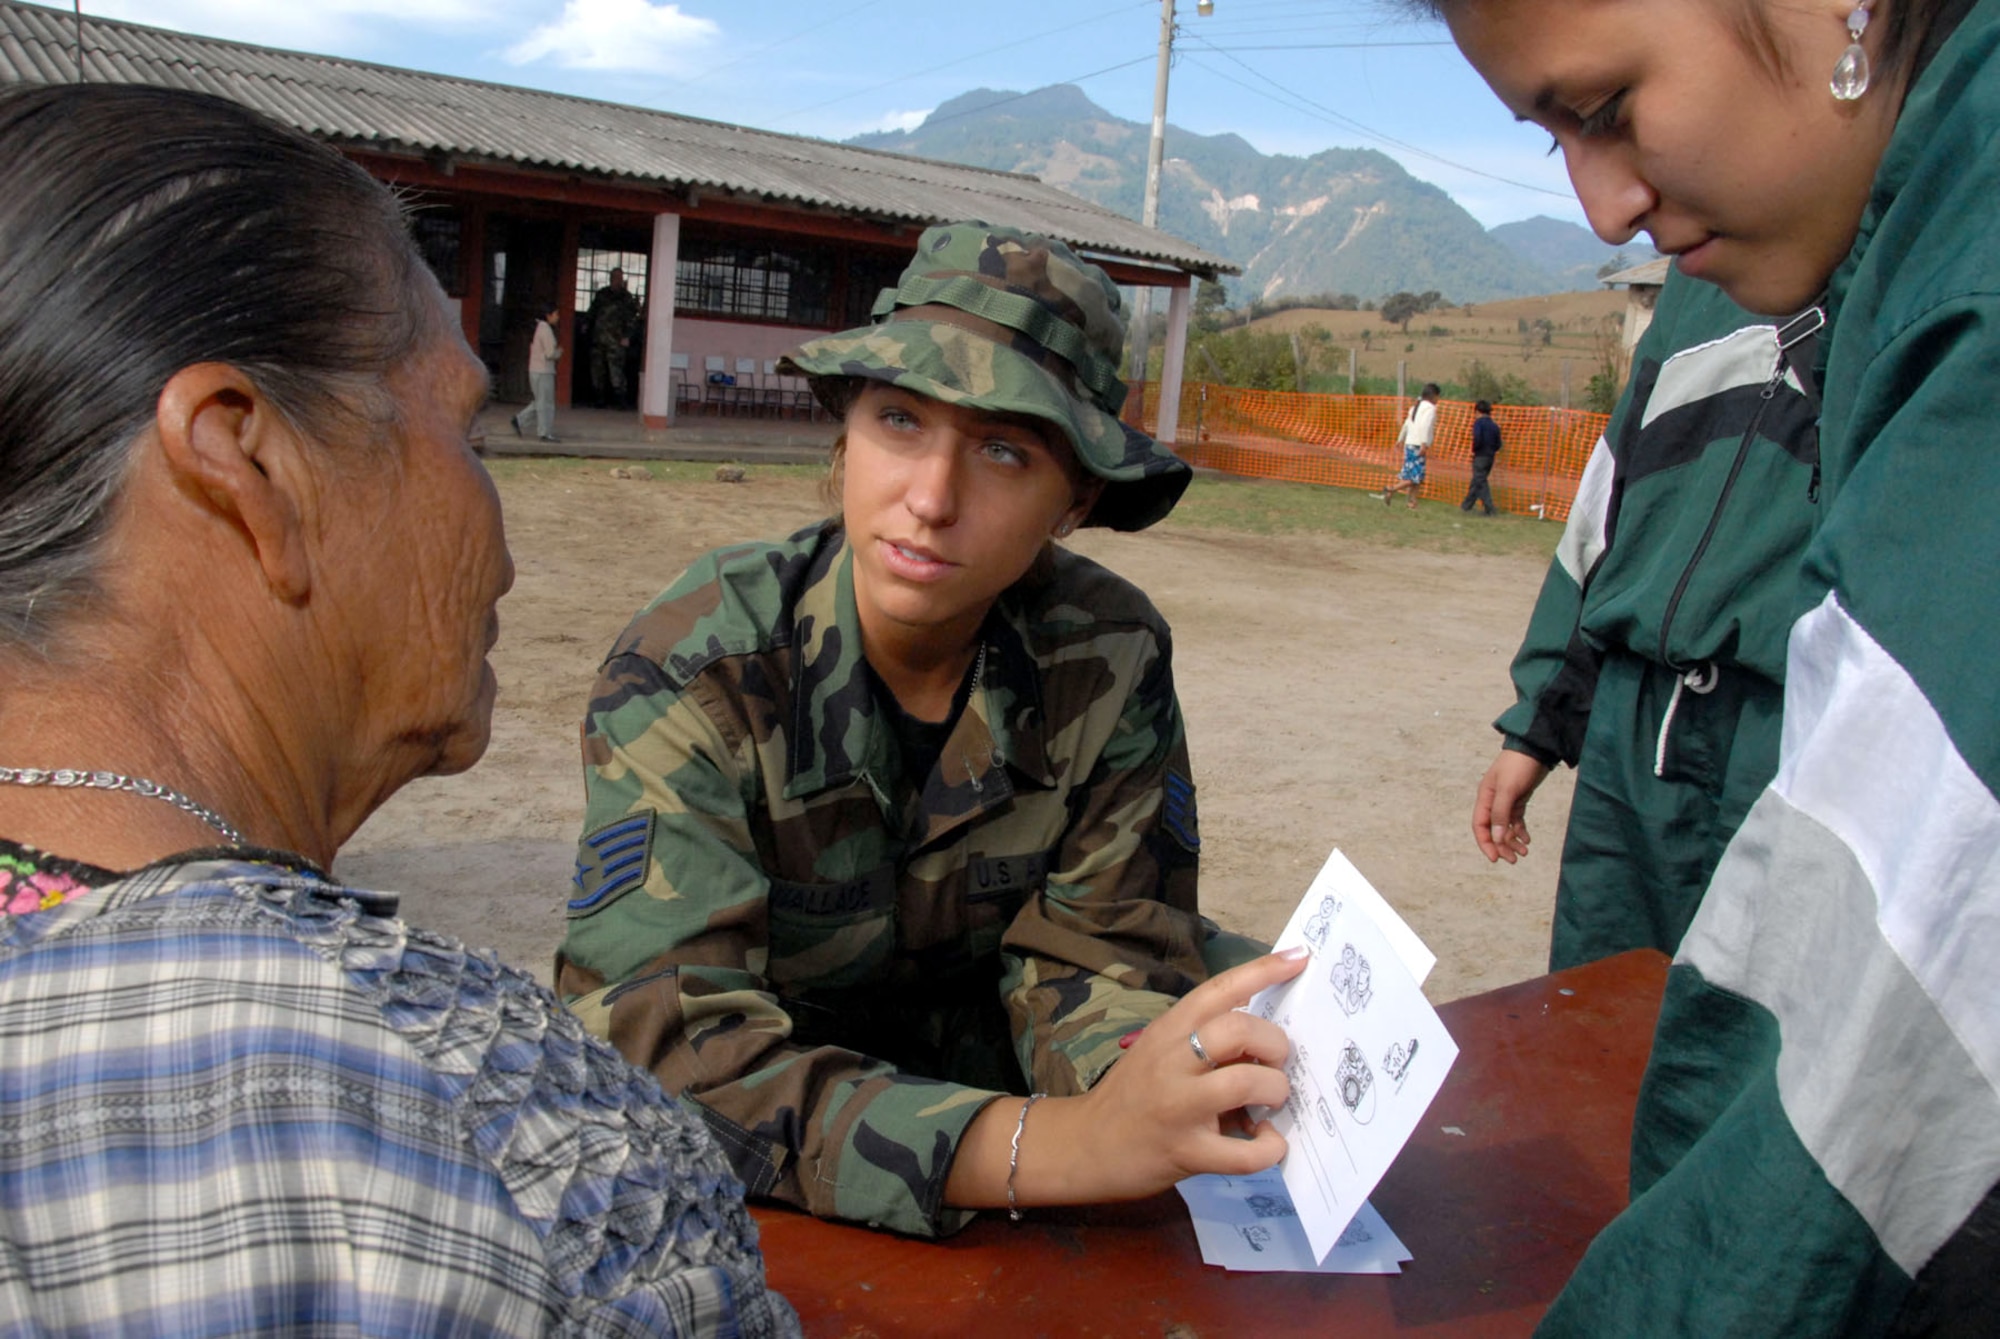 Staff Sgt. Lisa Wallace with the help of a student interpreter triages a patient set to receive medical care during the New Horizons Medical Readiness Training Exercise conducted April 14 through 28 in the region of San Marcos, Guatemala. The medical team treated more than 8,000 patients during their stay in Guatemala. Sergeant Wallace is a medical technician with the 445th Aerospace Medicine Squadron, Wright Patterson Air Force Base, Ohio. (U.S. Air Force photo/Master Sgt. Chance C. Babin)
